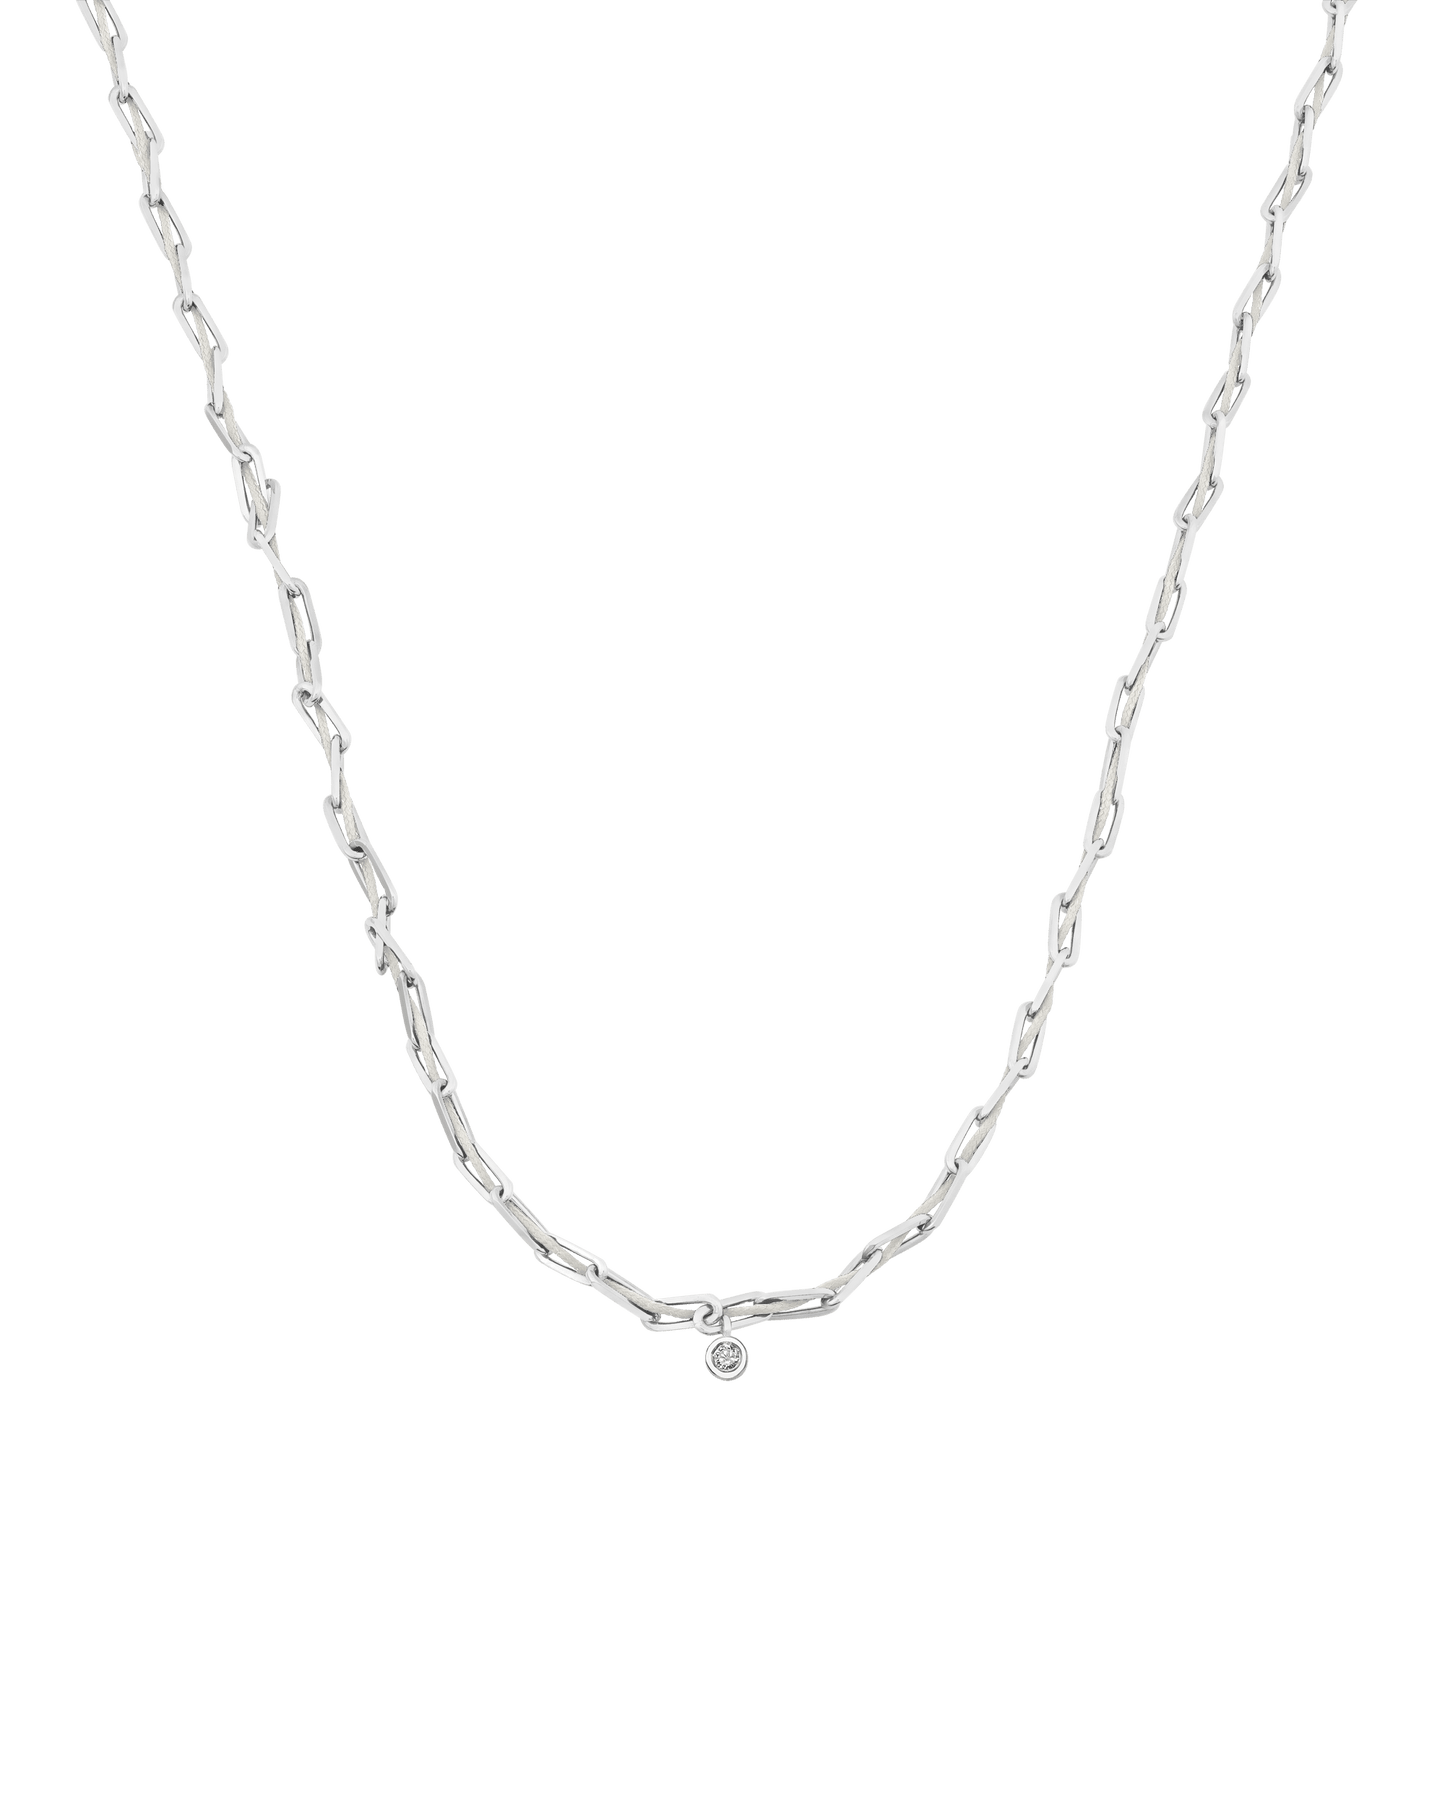 Twine Diamond Necklace - 925 Sterling Silver Necklaces magal-dev Pearl Medium: 0.05ct 16"